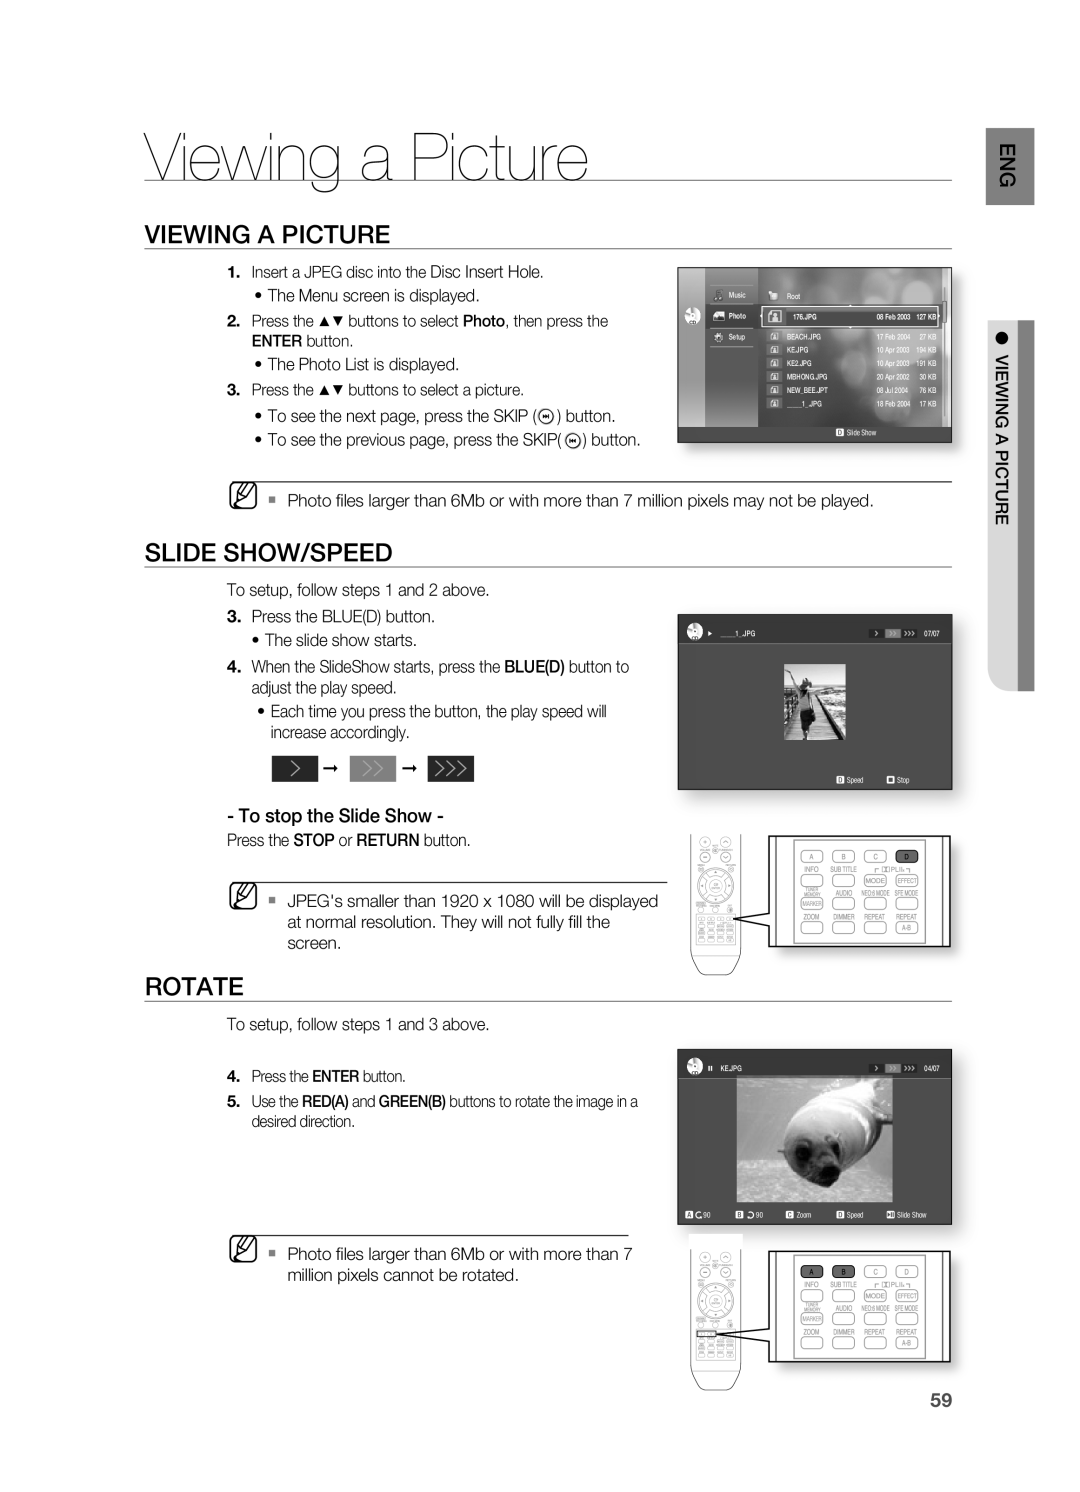 Samsung HT-BD2S manual Viewing a Picture, VIEWIng A PICTURE, Slide Show/Speed, Rotate 